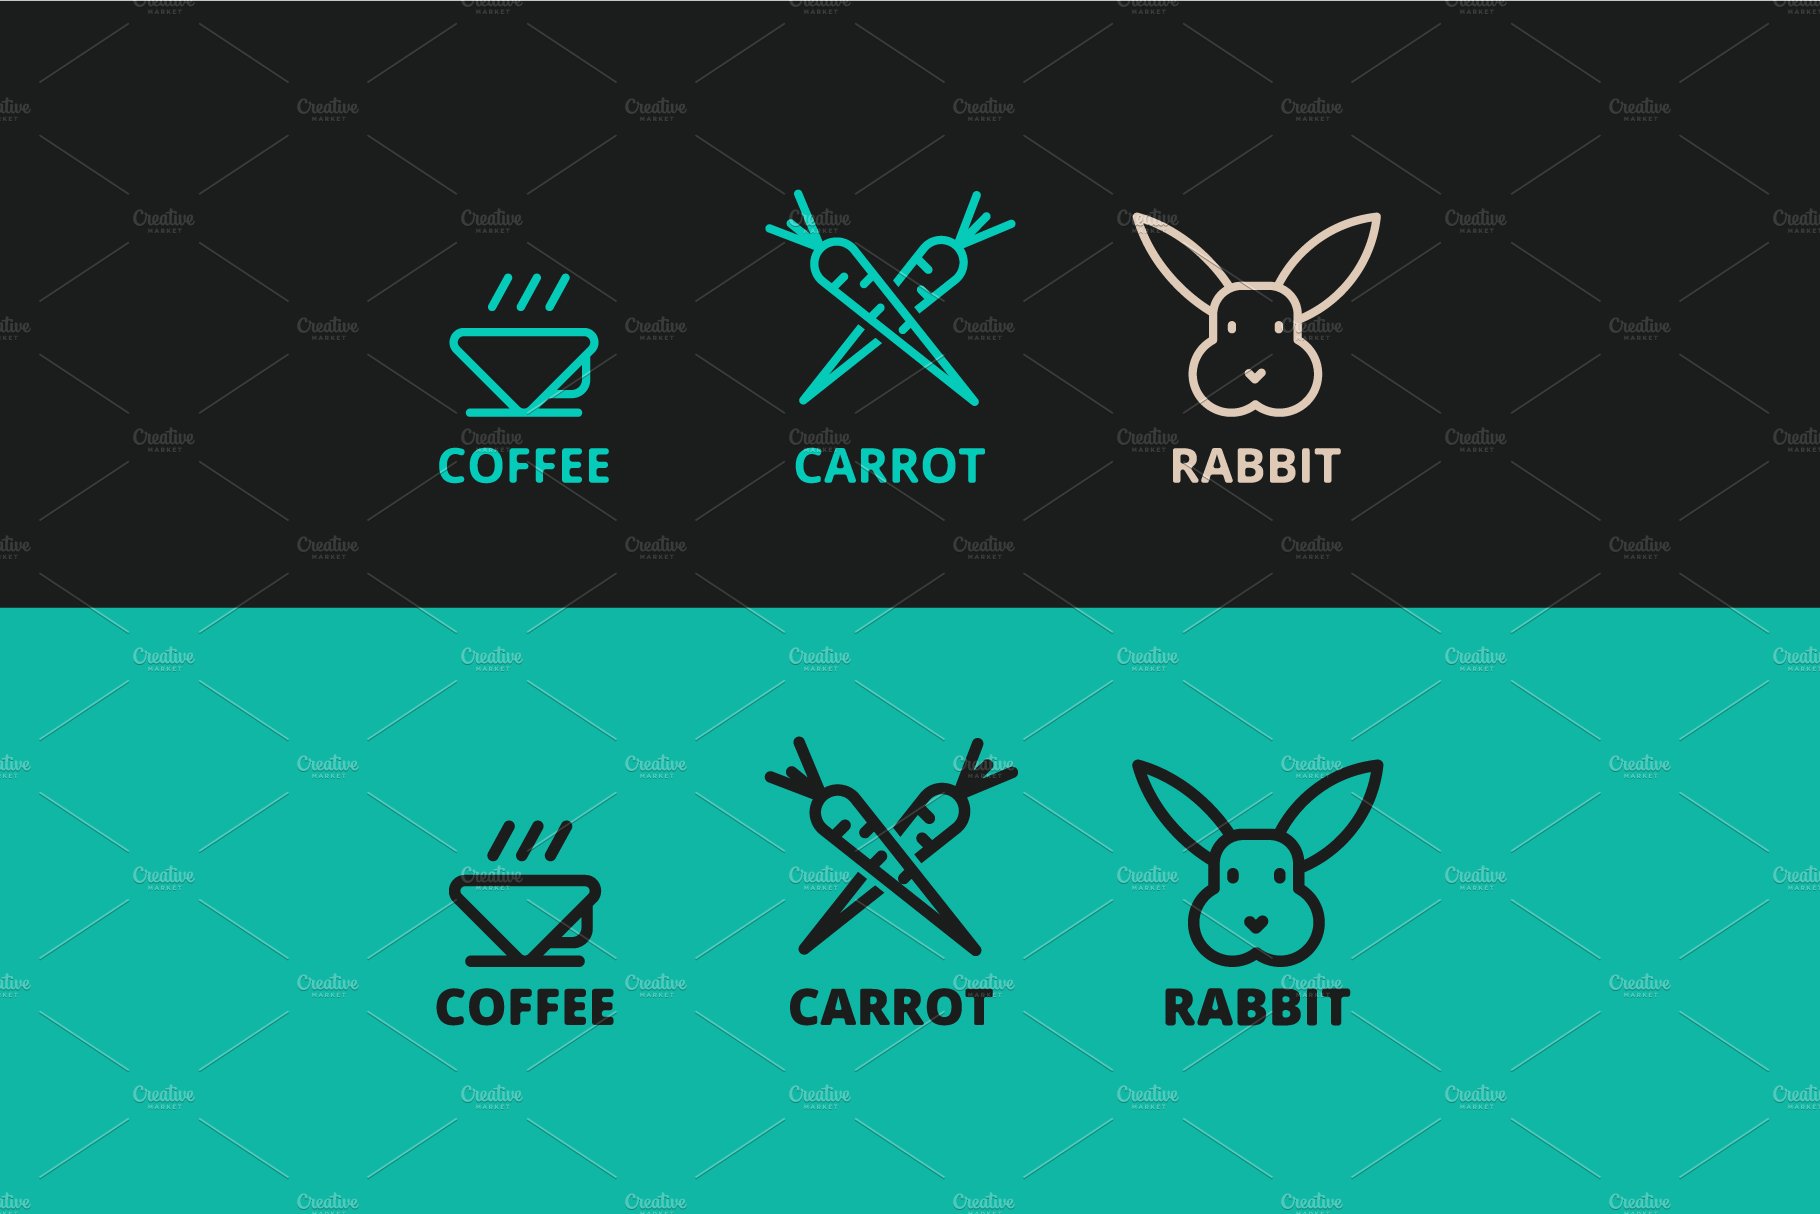 three vector logos of rabbit, carrot cover image.